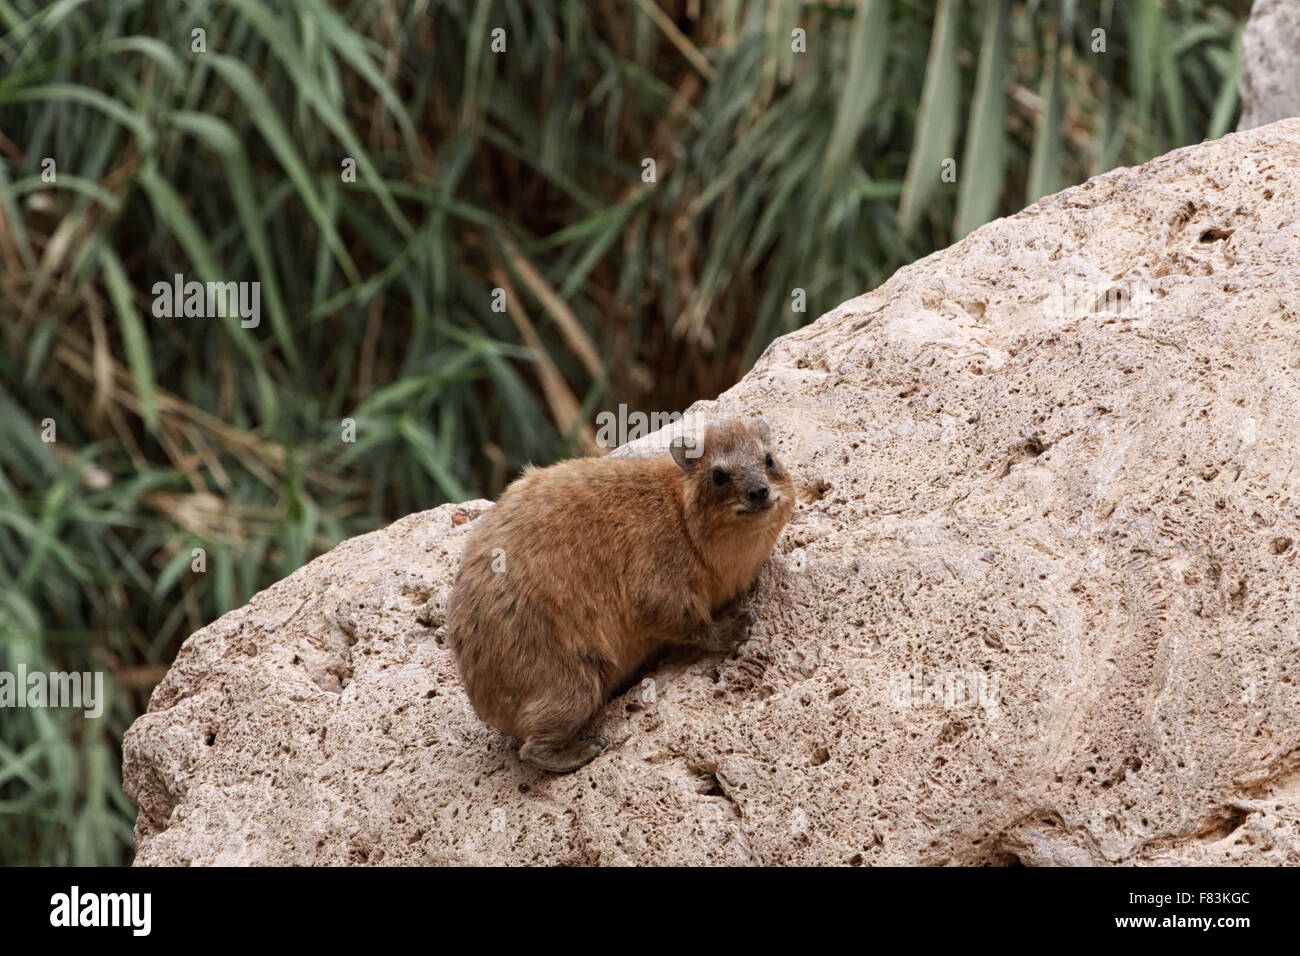 Hyrax This rodent looking animal lives in Ein Gedi in Israel Stock Photo